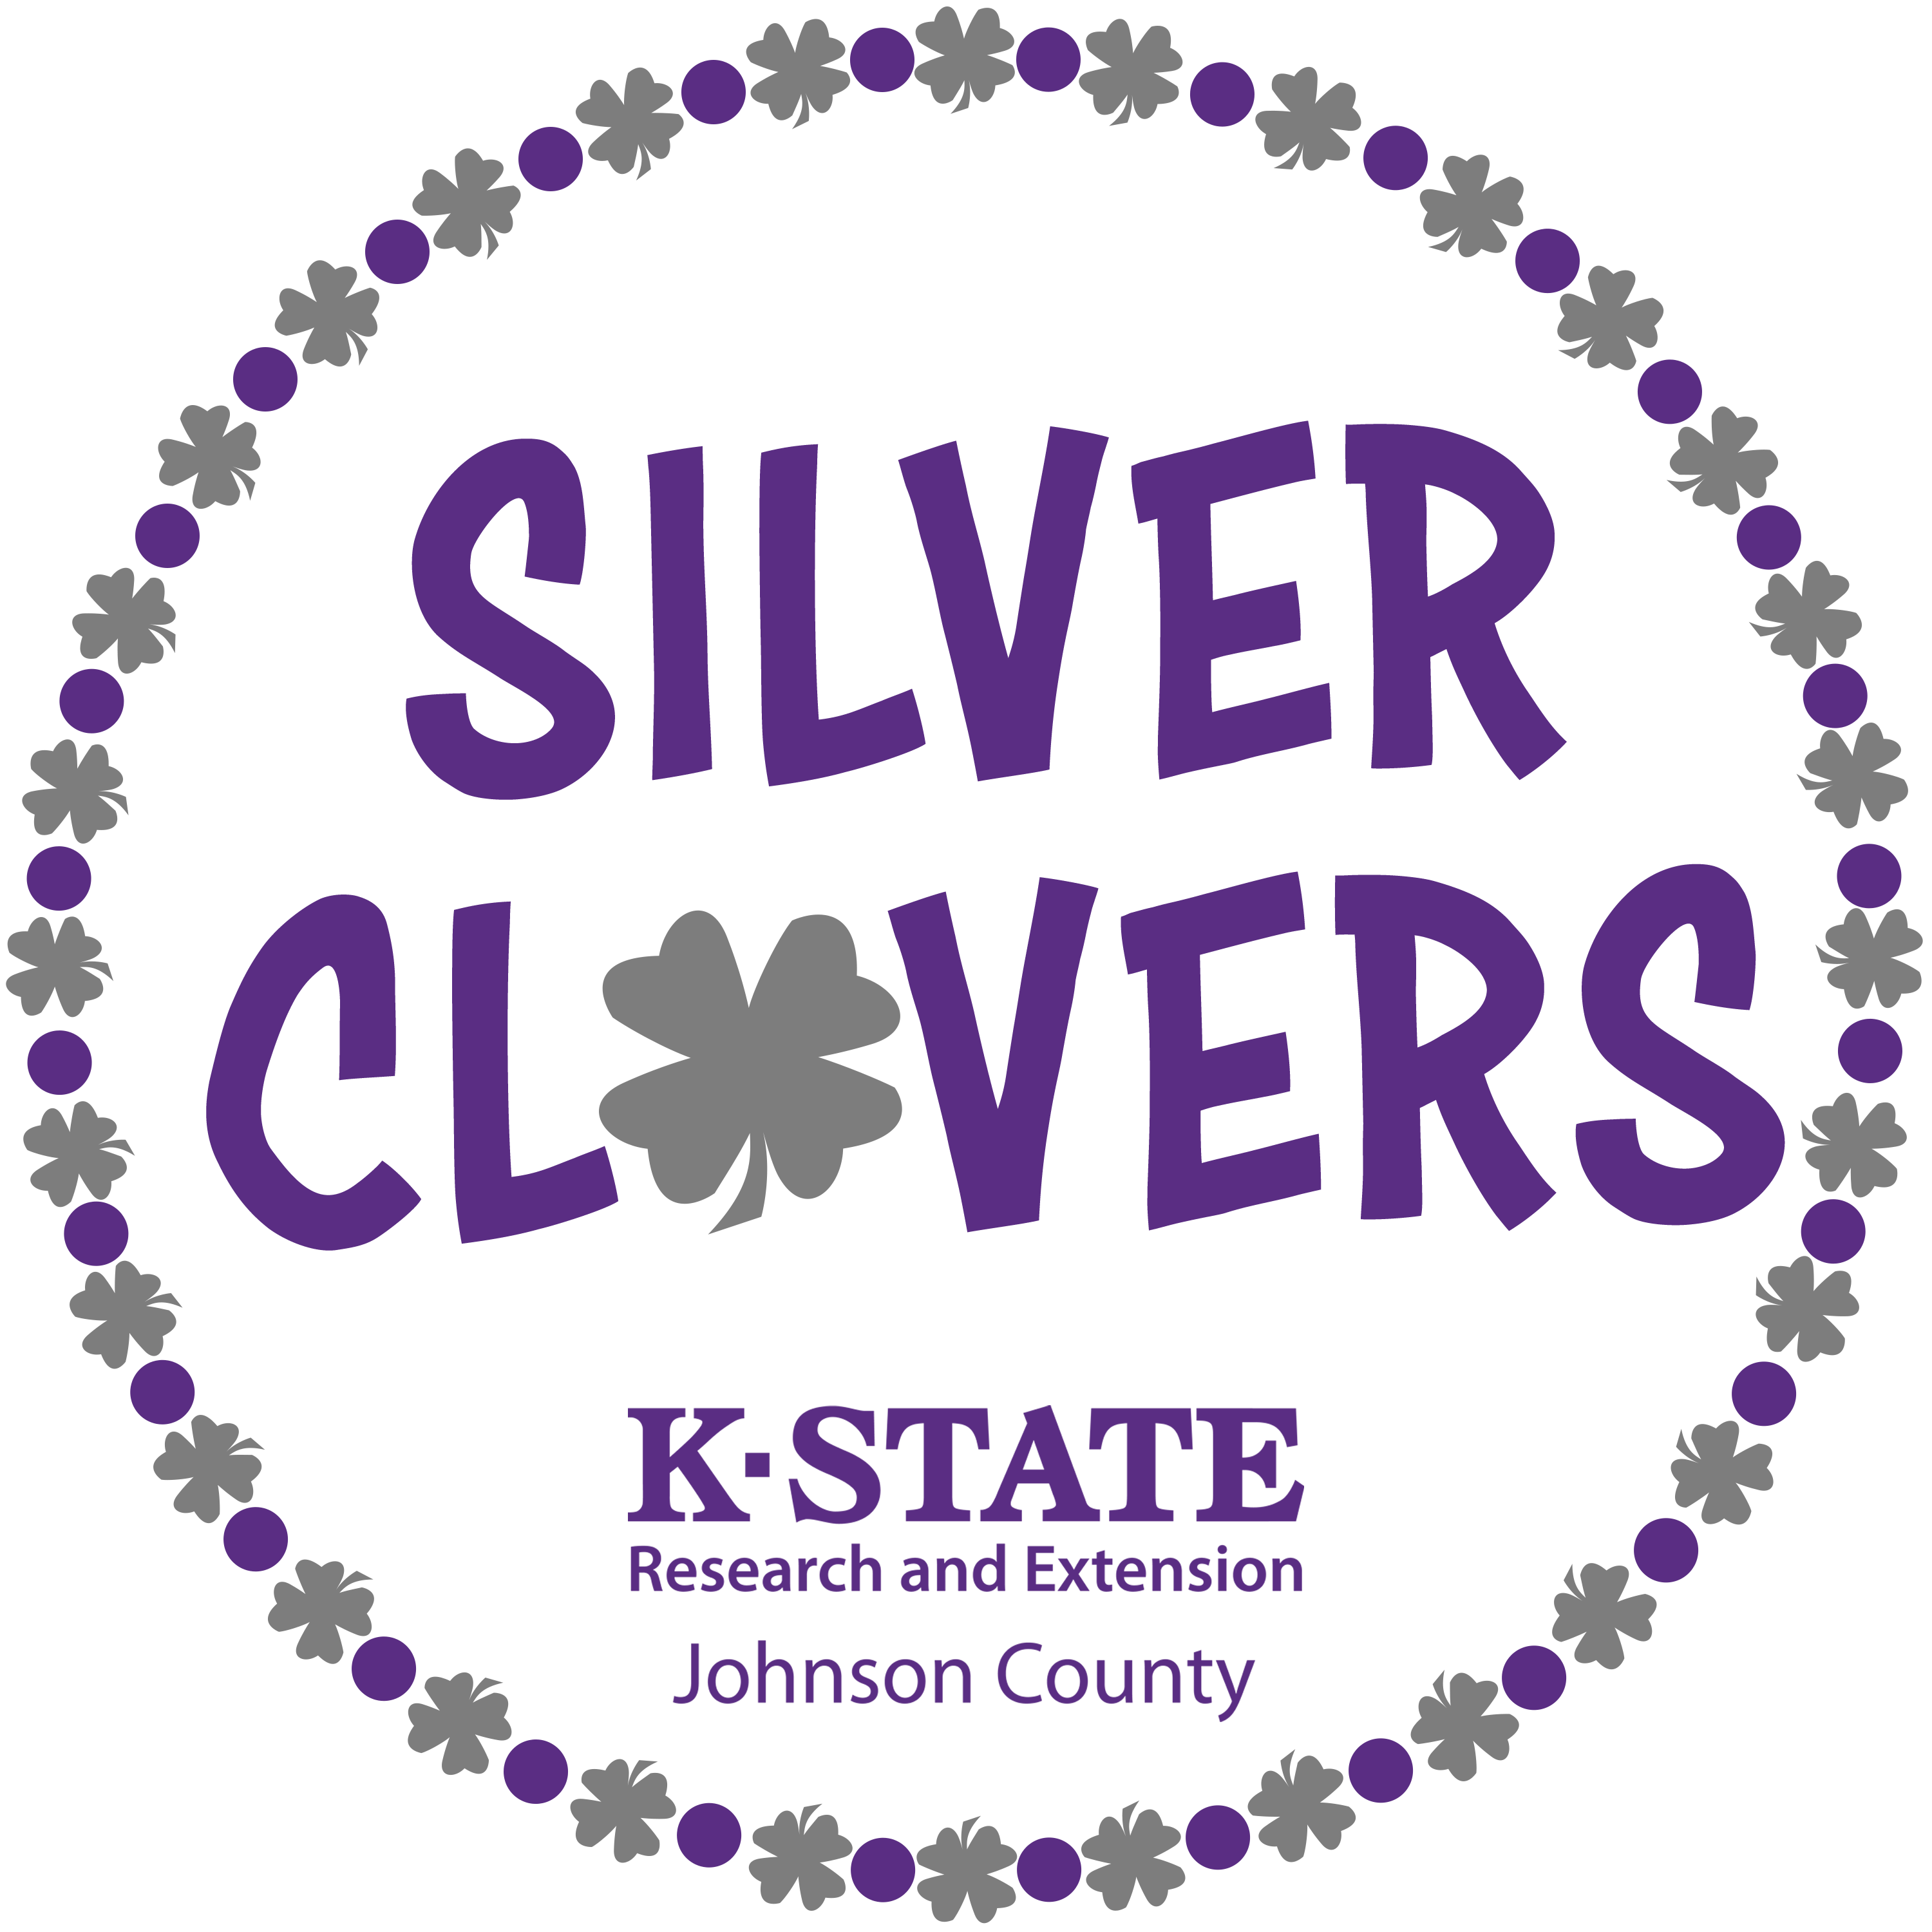 silver clovers